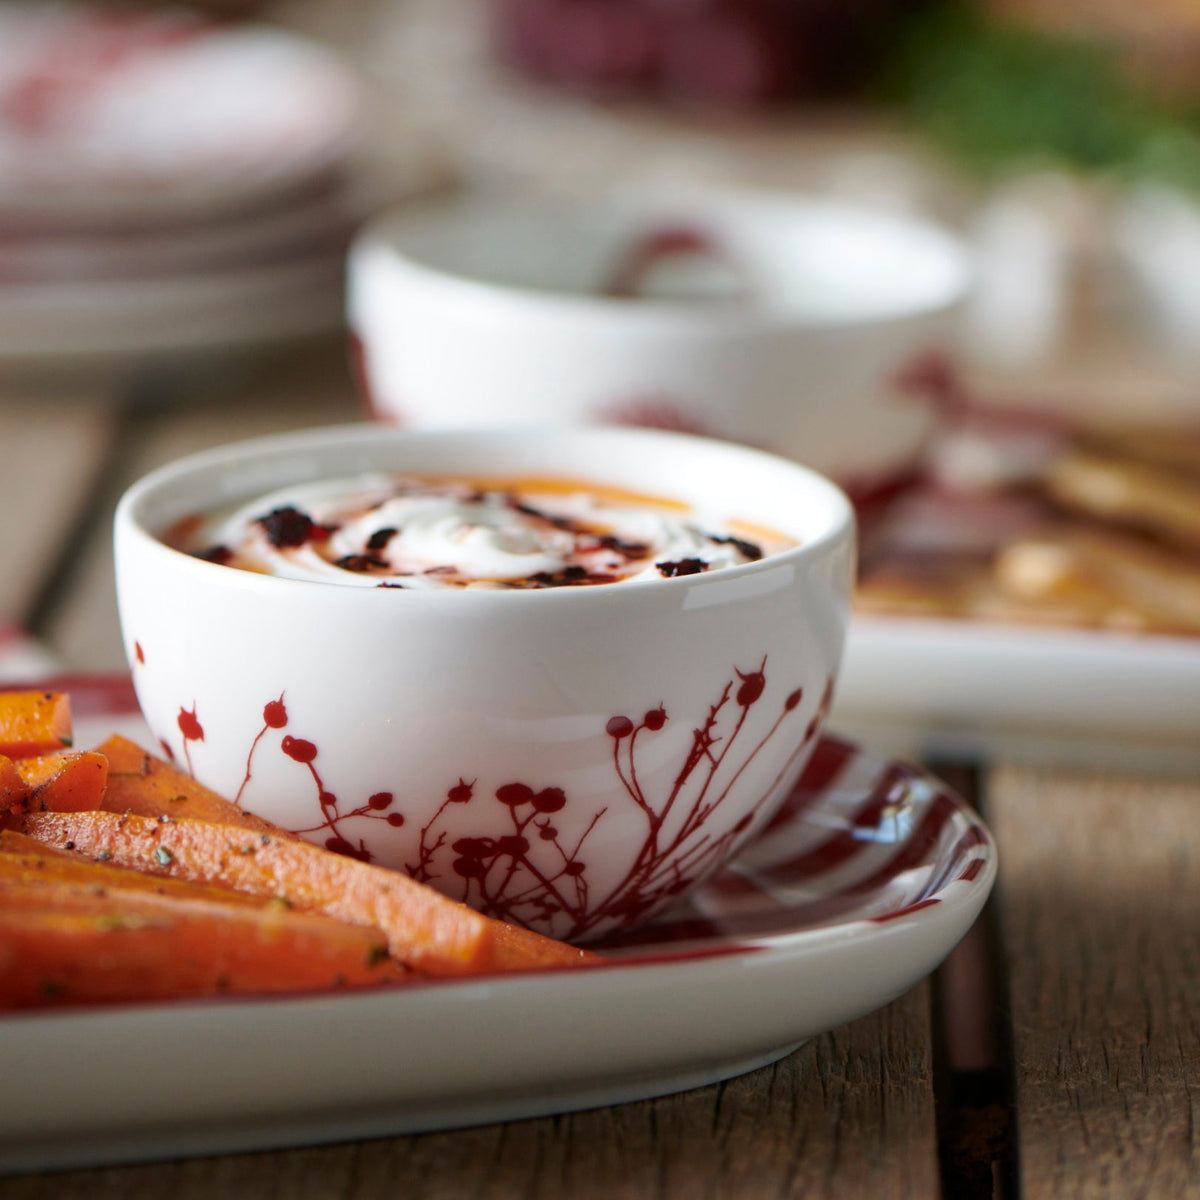 A Winterberries Snack Bowl with a plate of dip and a plate of carrots adorned with festive red berries, from Caskata Artisanal Home.